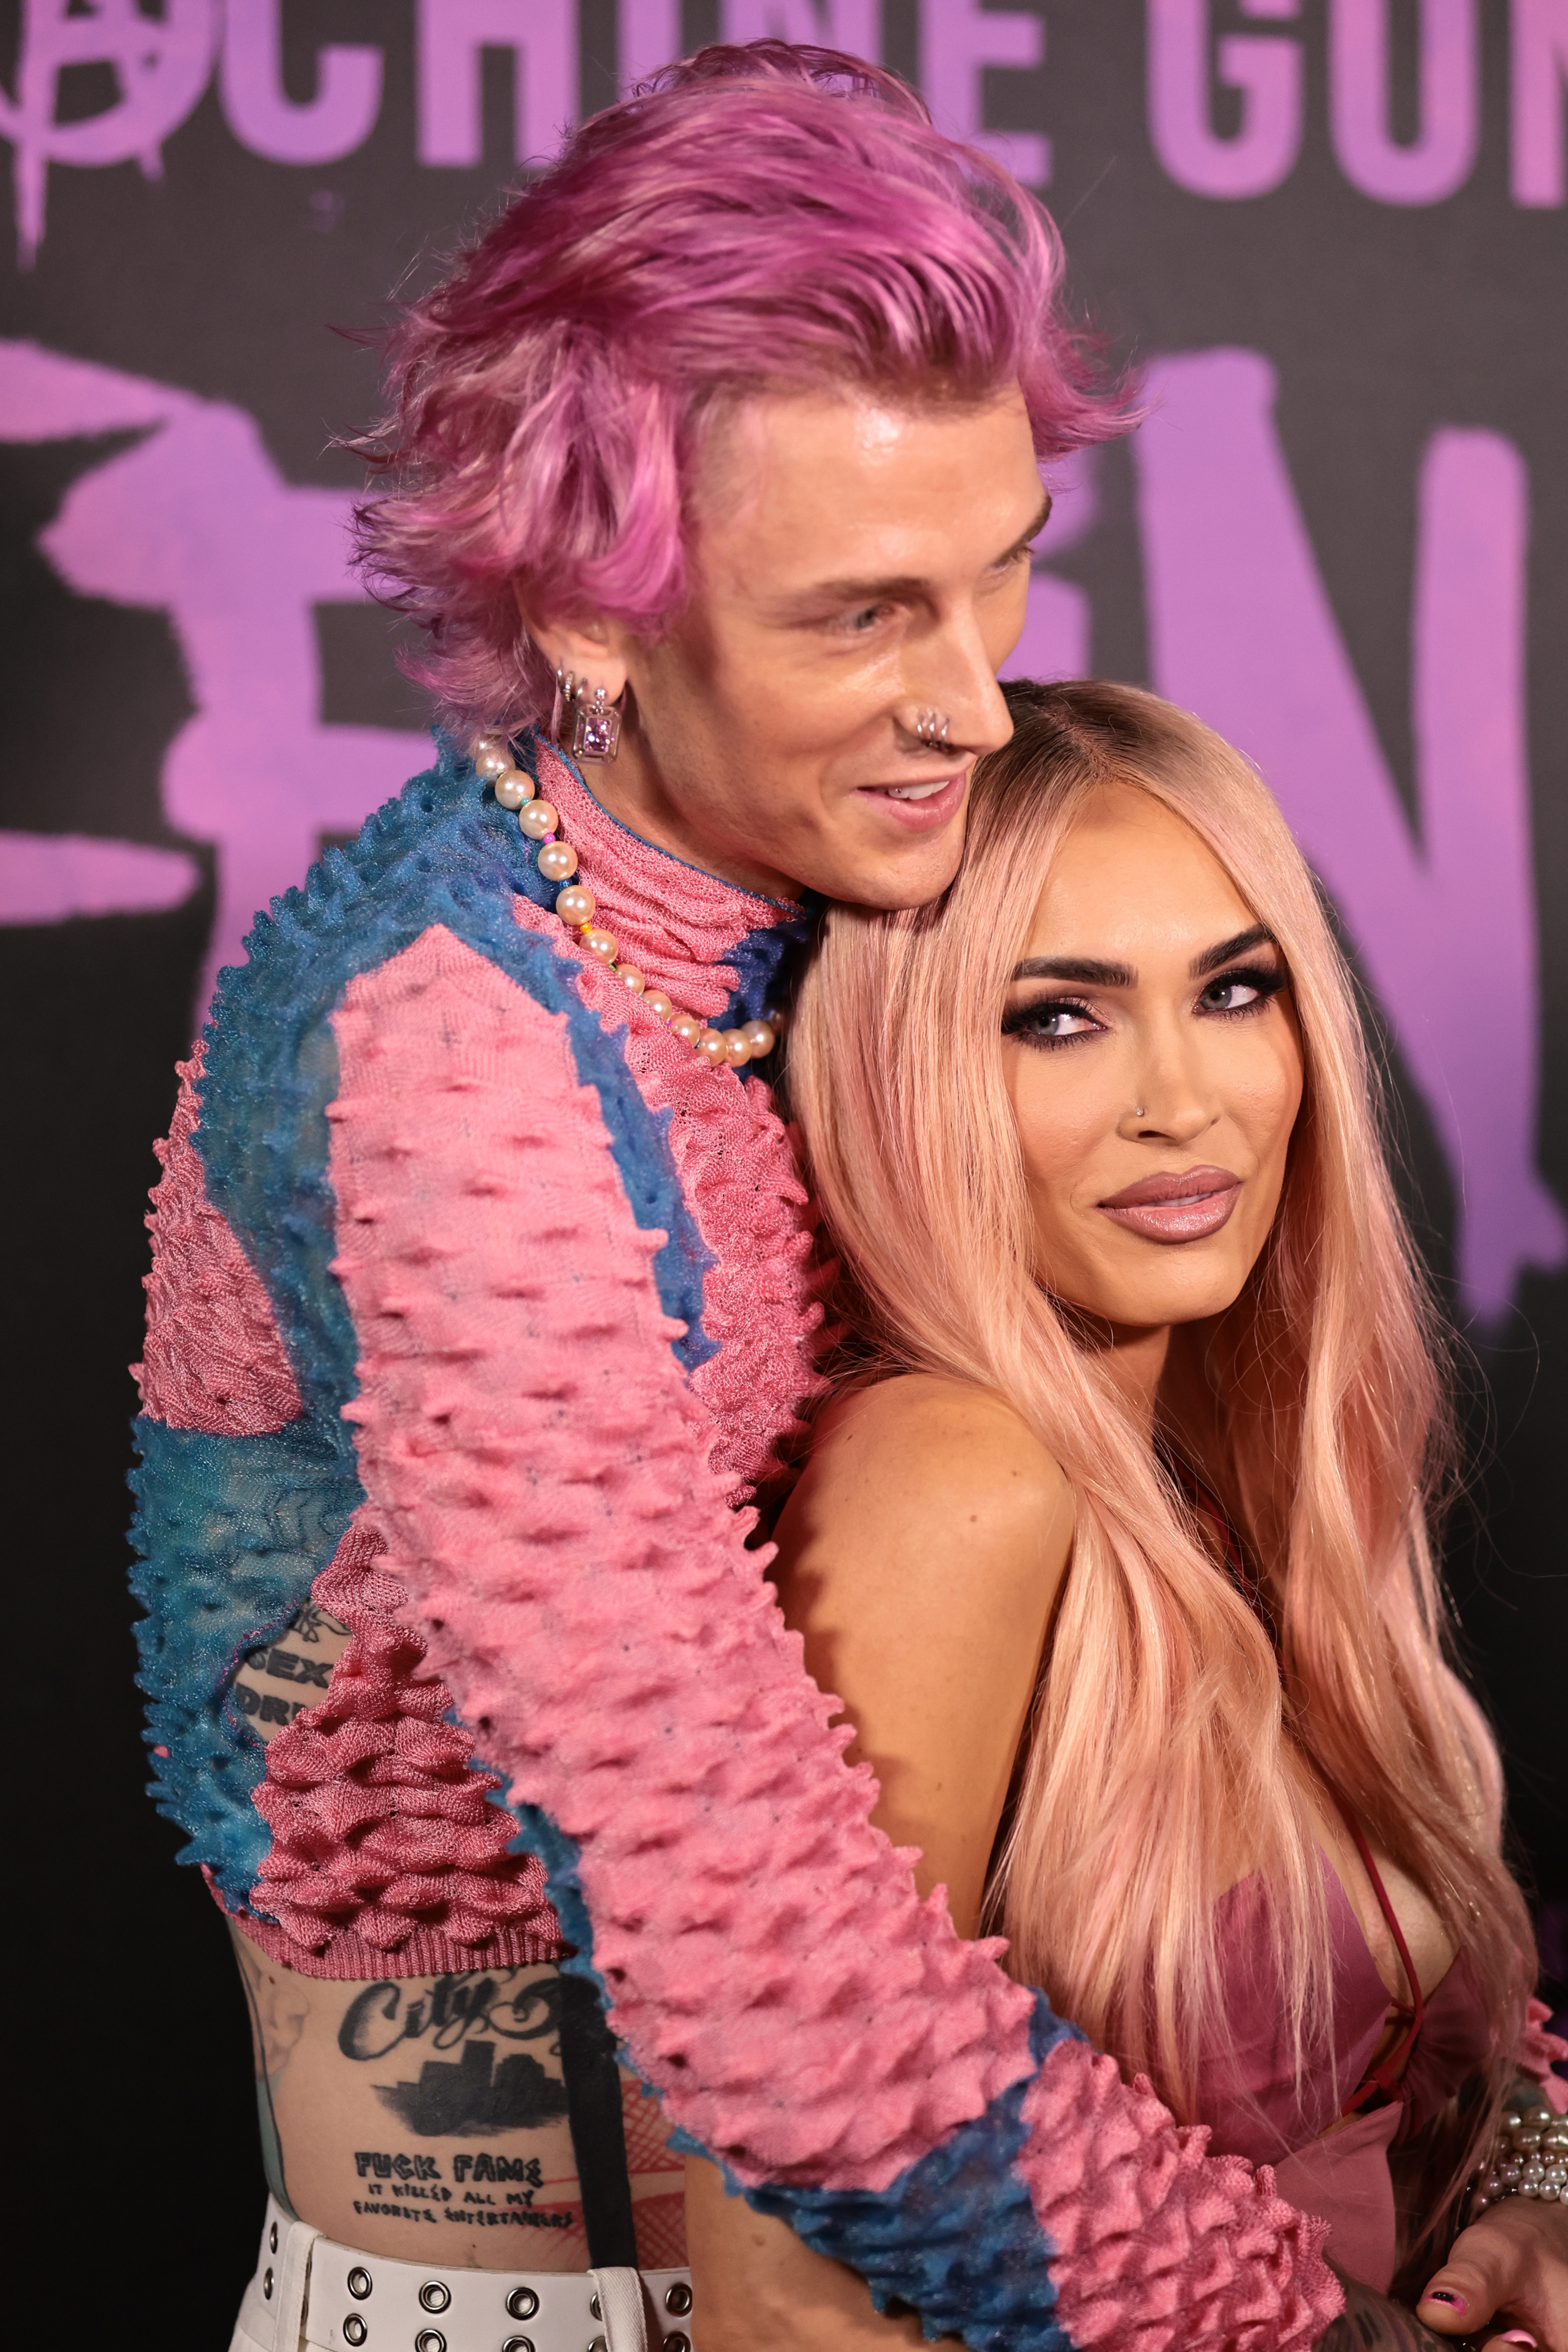 Machine Gun Kelly and Megan Fox at the premiere of "Machine Gun Kelly's Life In Pink" in New York City on June 27, 2022 | Source: Getty Images